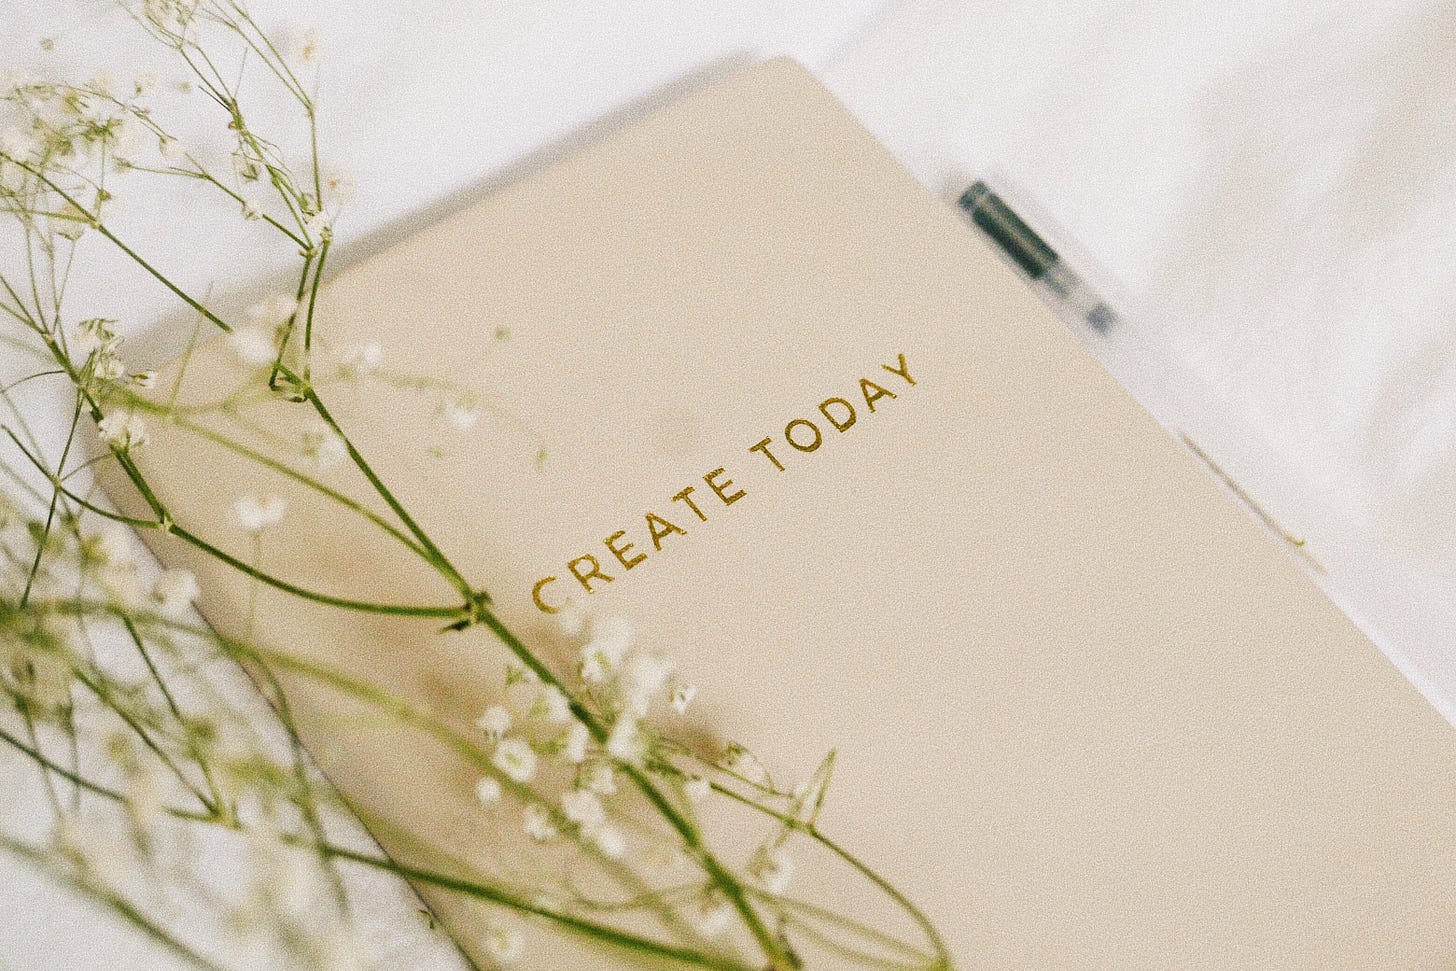 Journal with "Create Today" embossed on the front